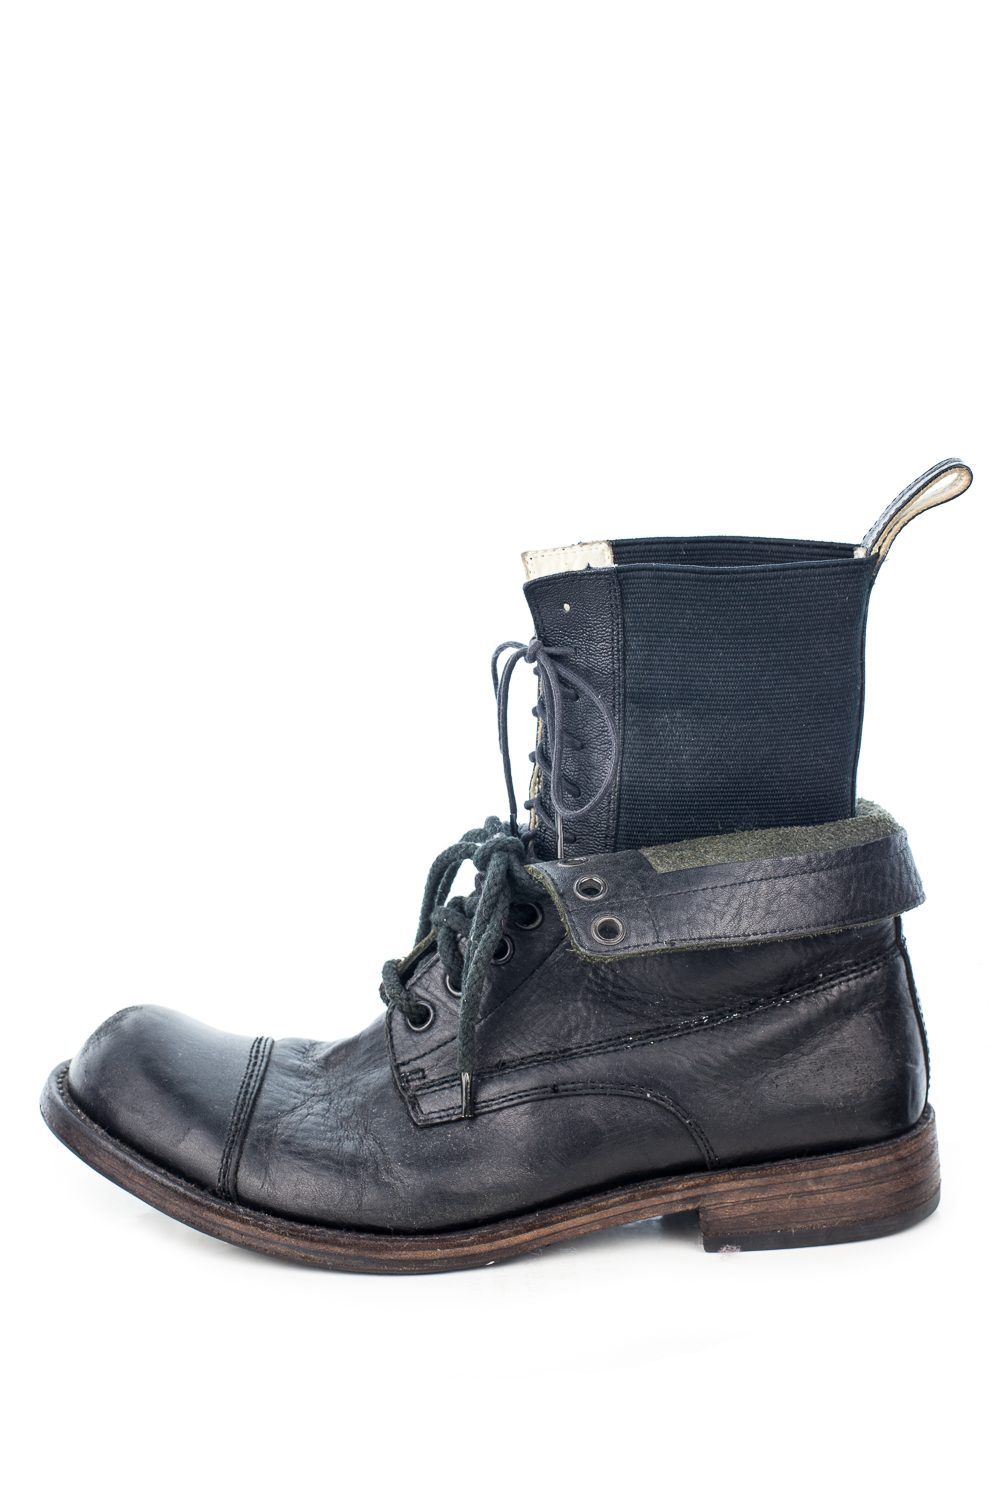 SS08 “Birds” Double Boots